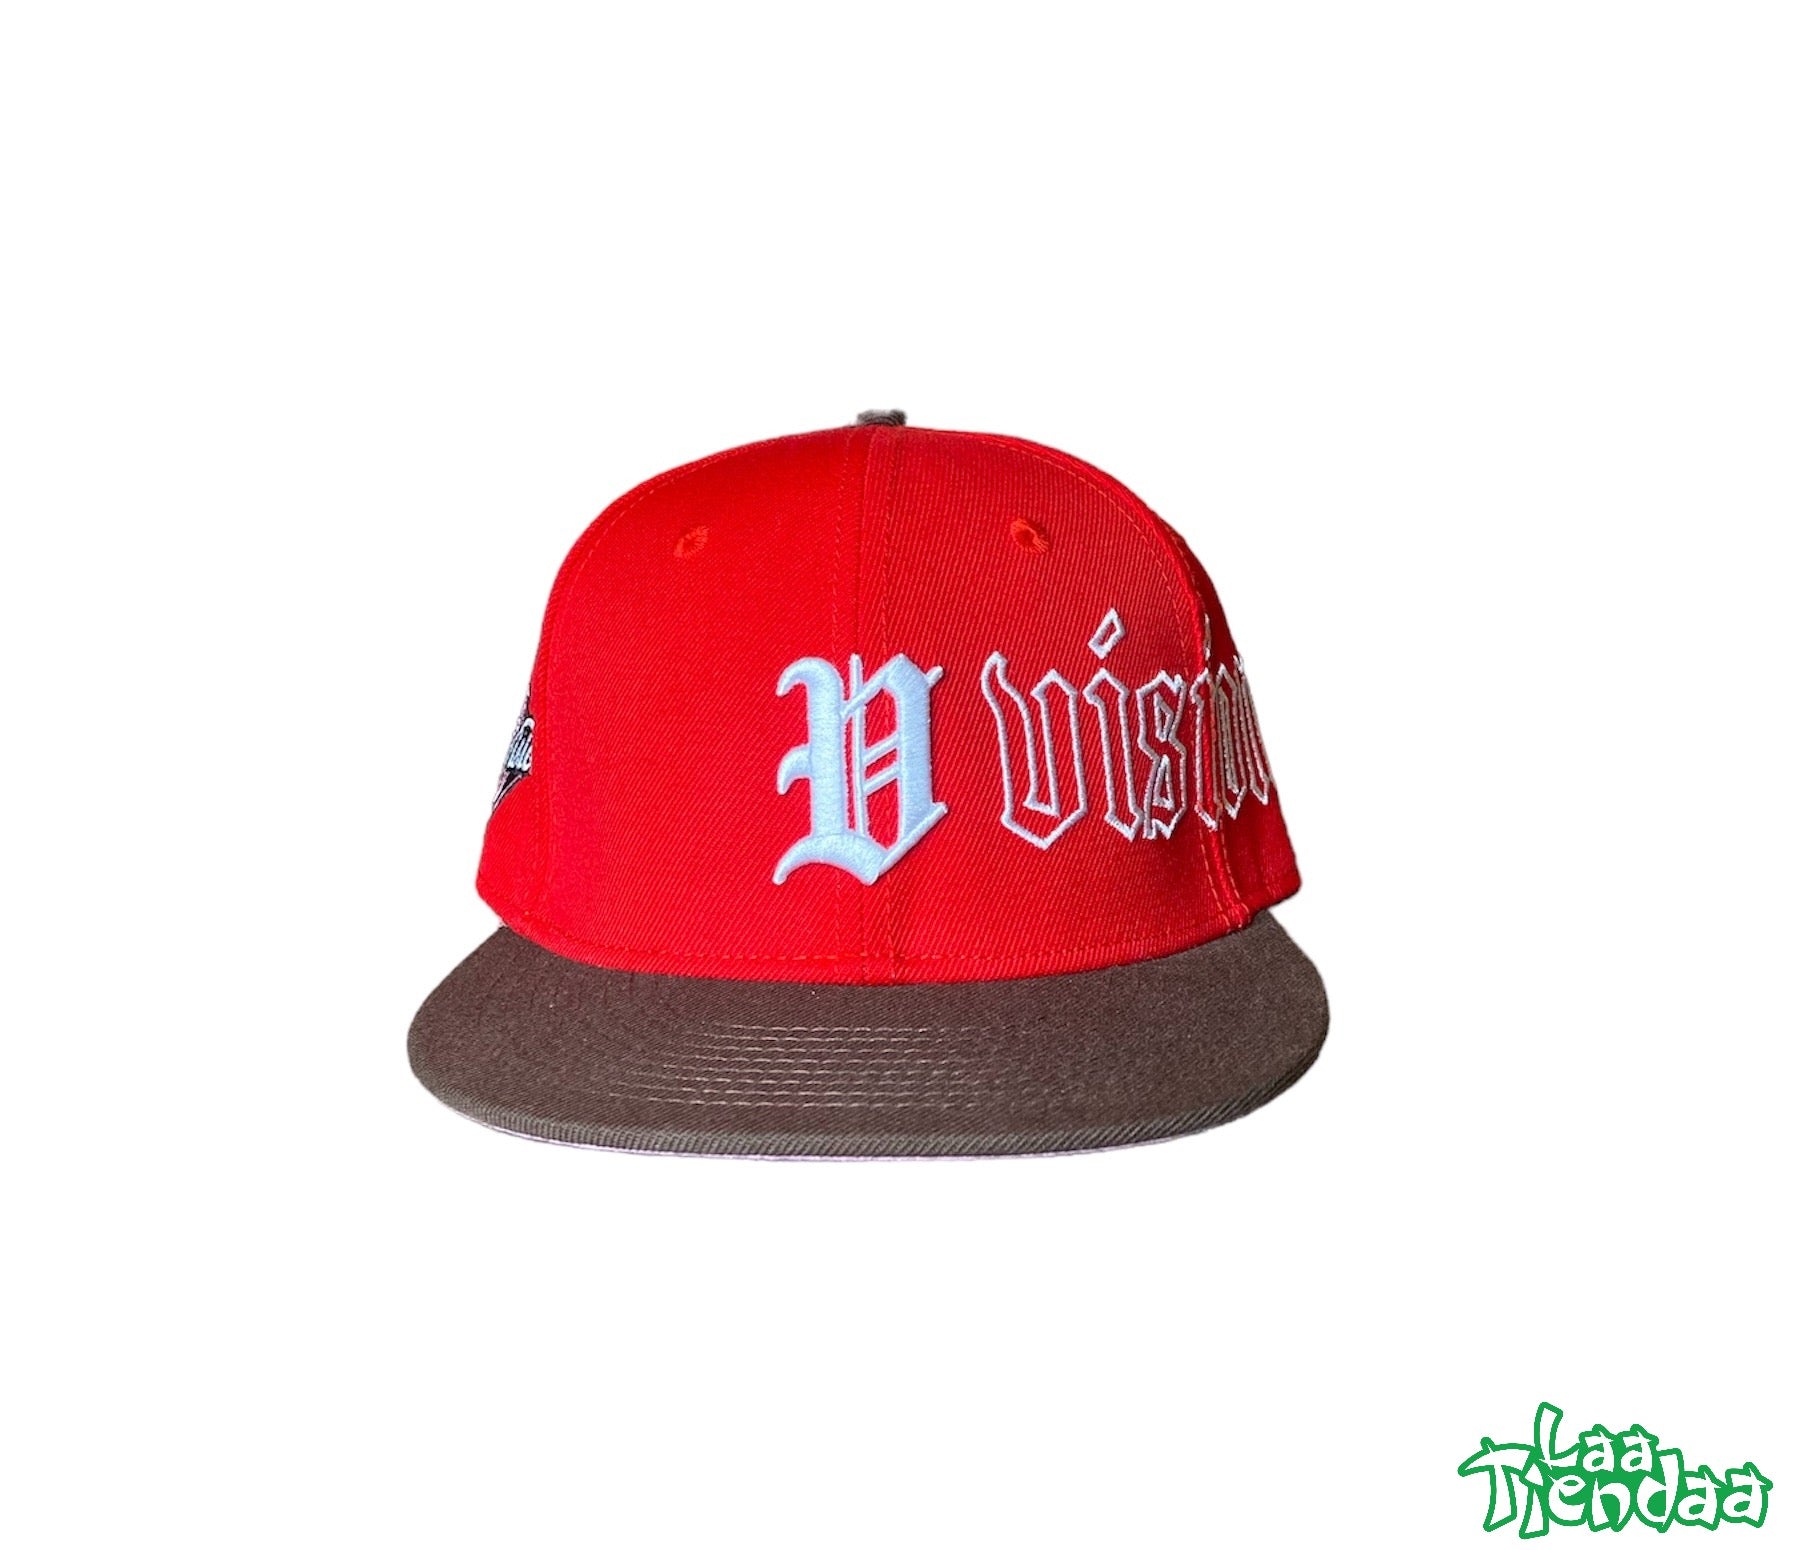 Visionare Red Fitted Hat